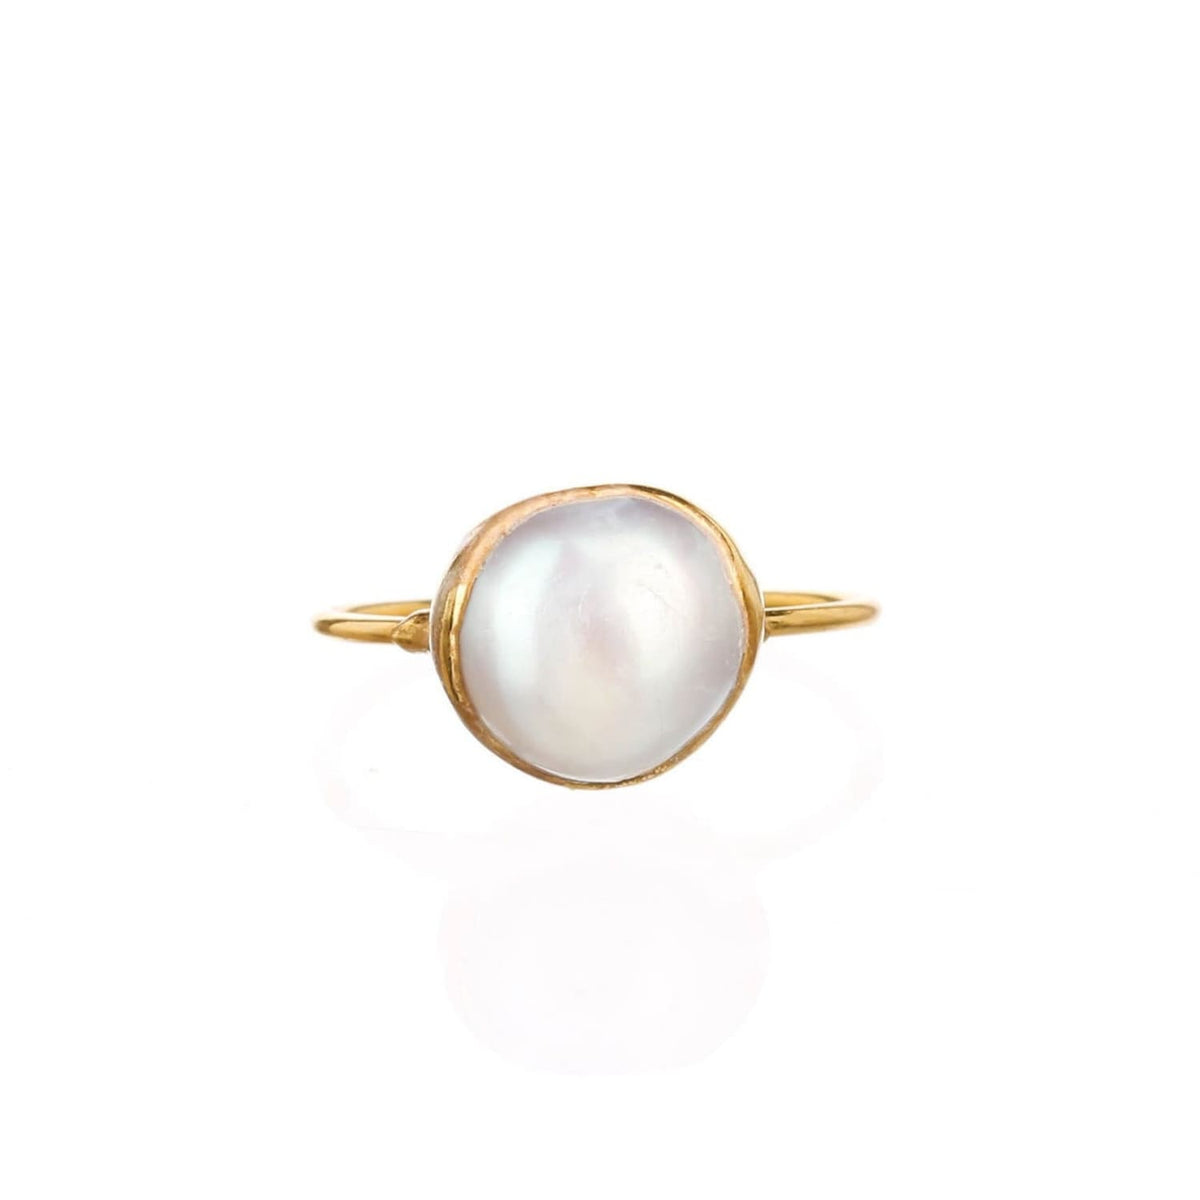 Large Raw Pearl Ring Gemstone Jewelry Rough Crystal Stone